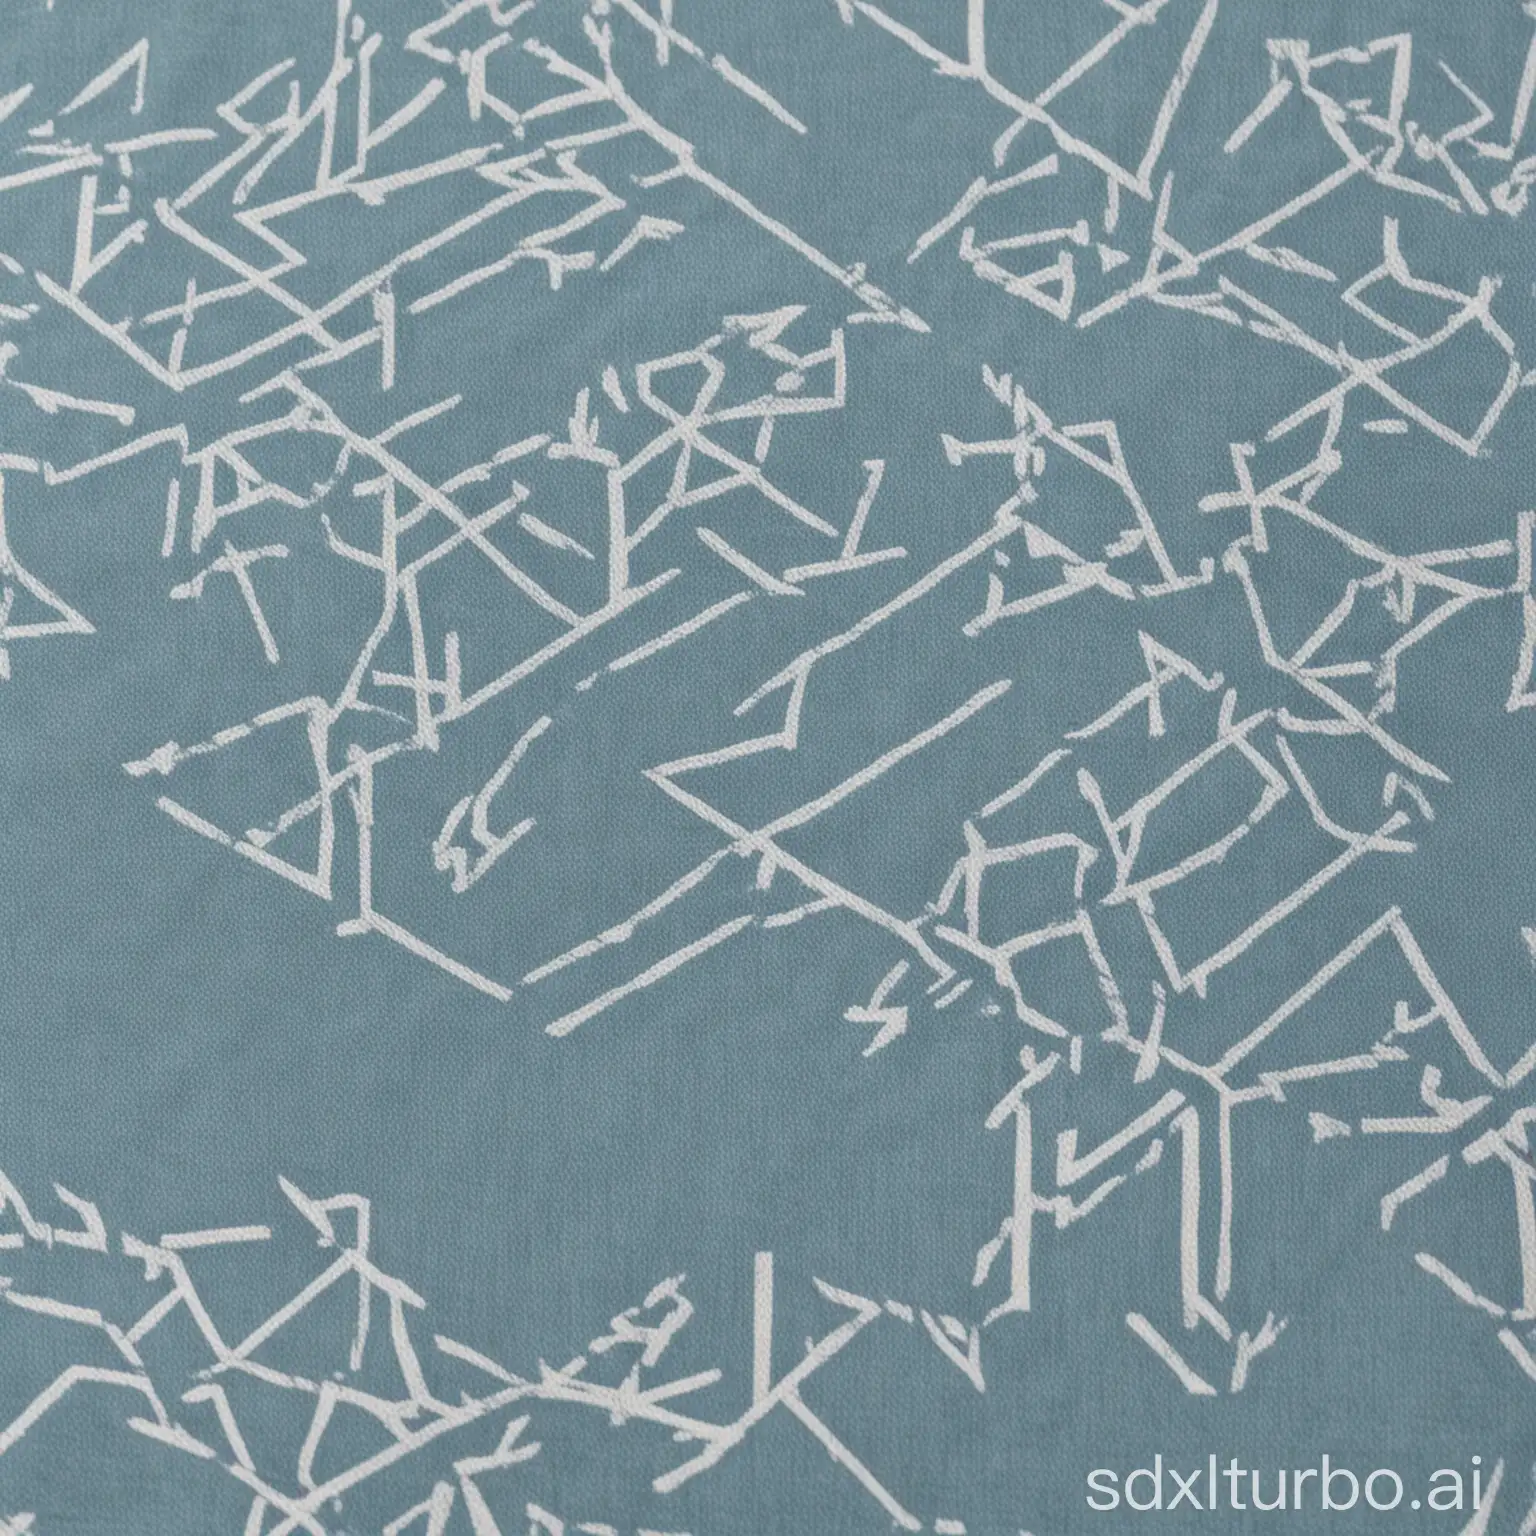 A close-up of a soft, cotton T-shirt. The T-shirt is light blue in color and has a unique pattern of geometric shapes. The fabric looks smooth and durable.